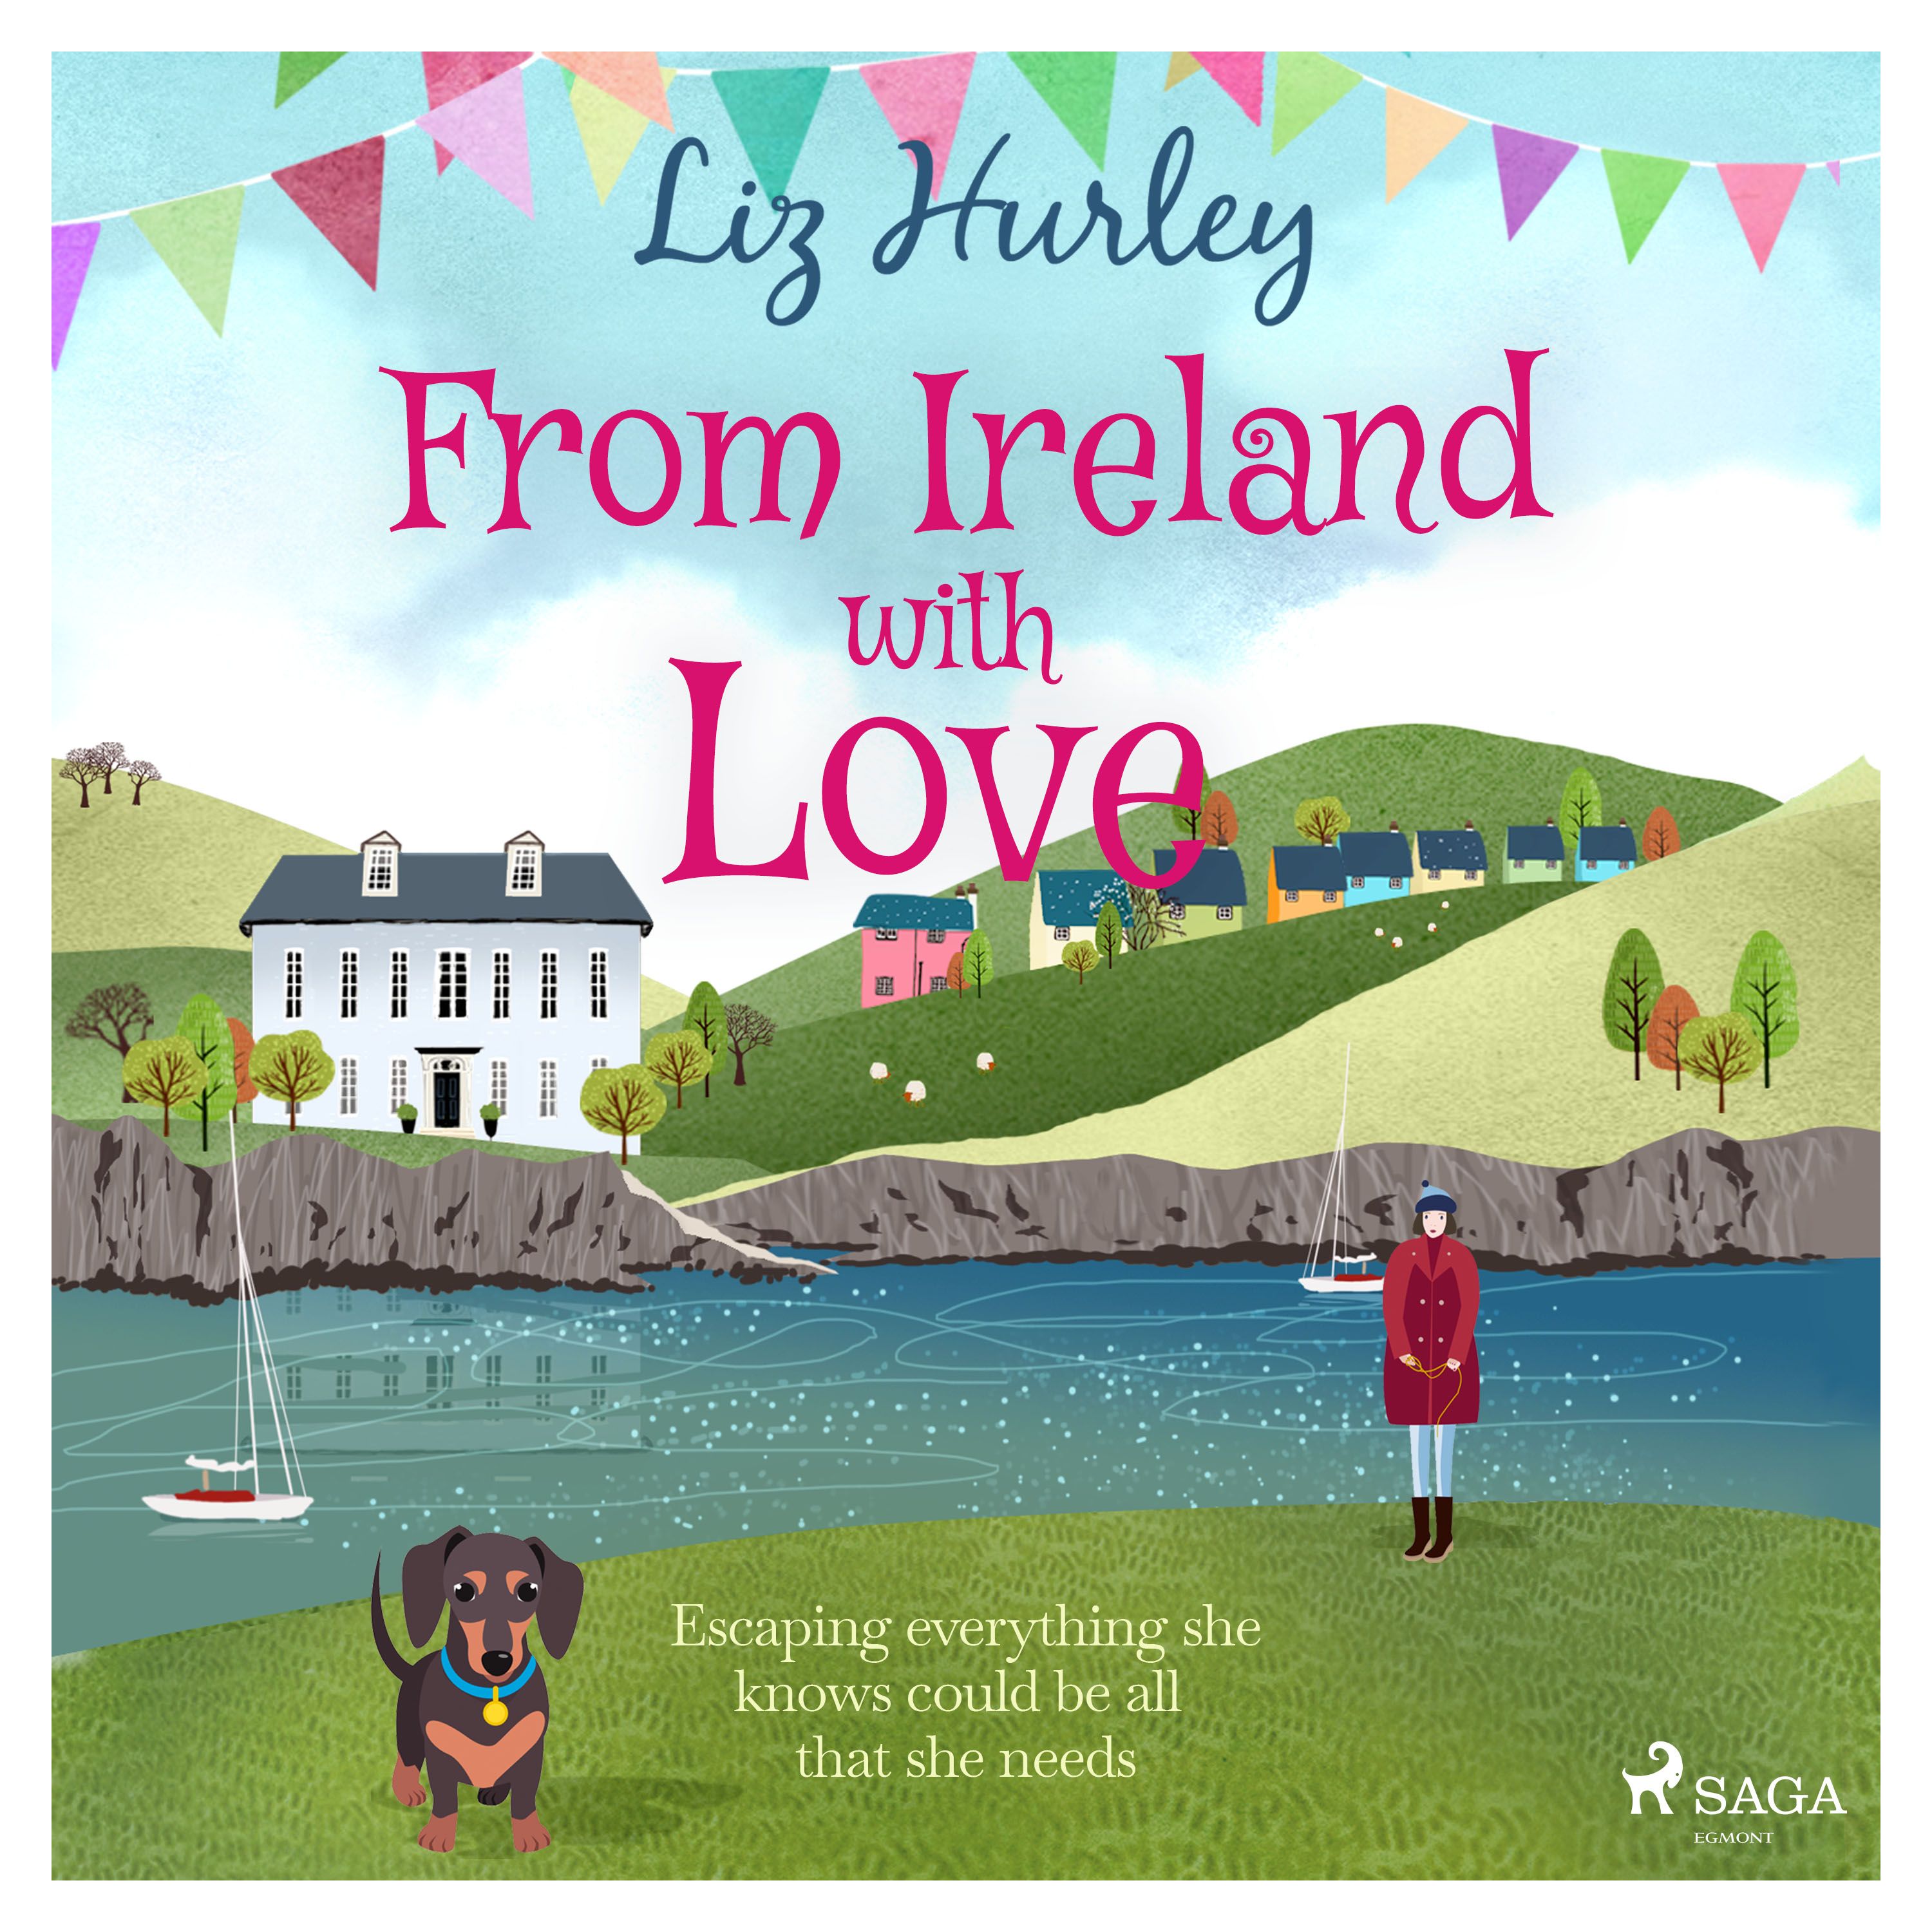 From Ireland With Love, audiobook by Liz Hurley